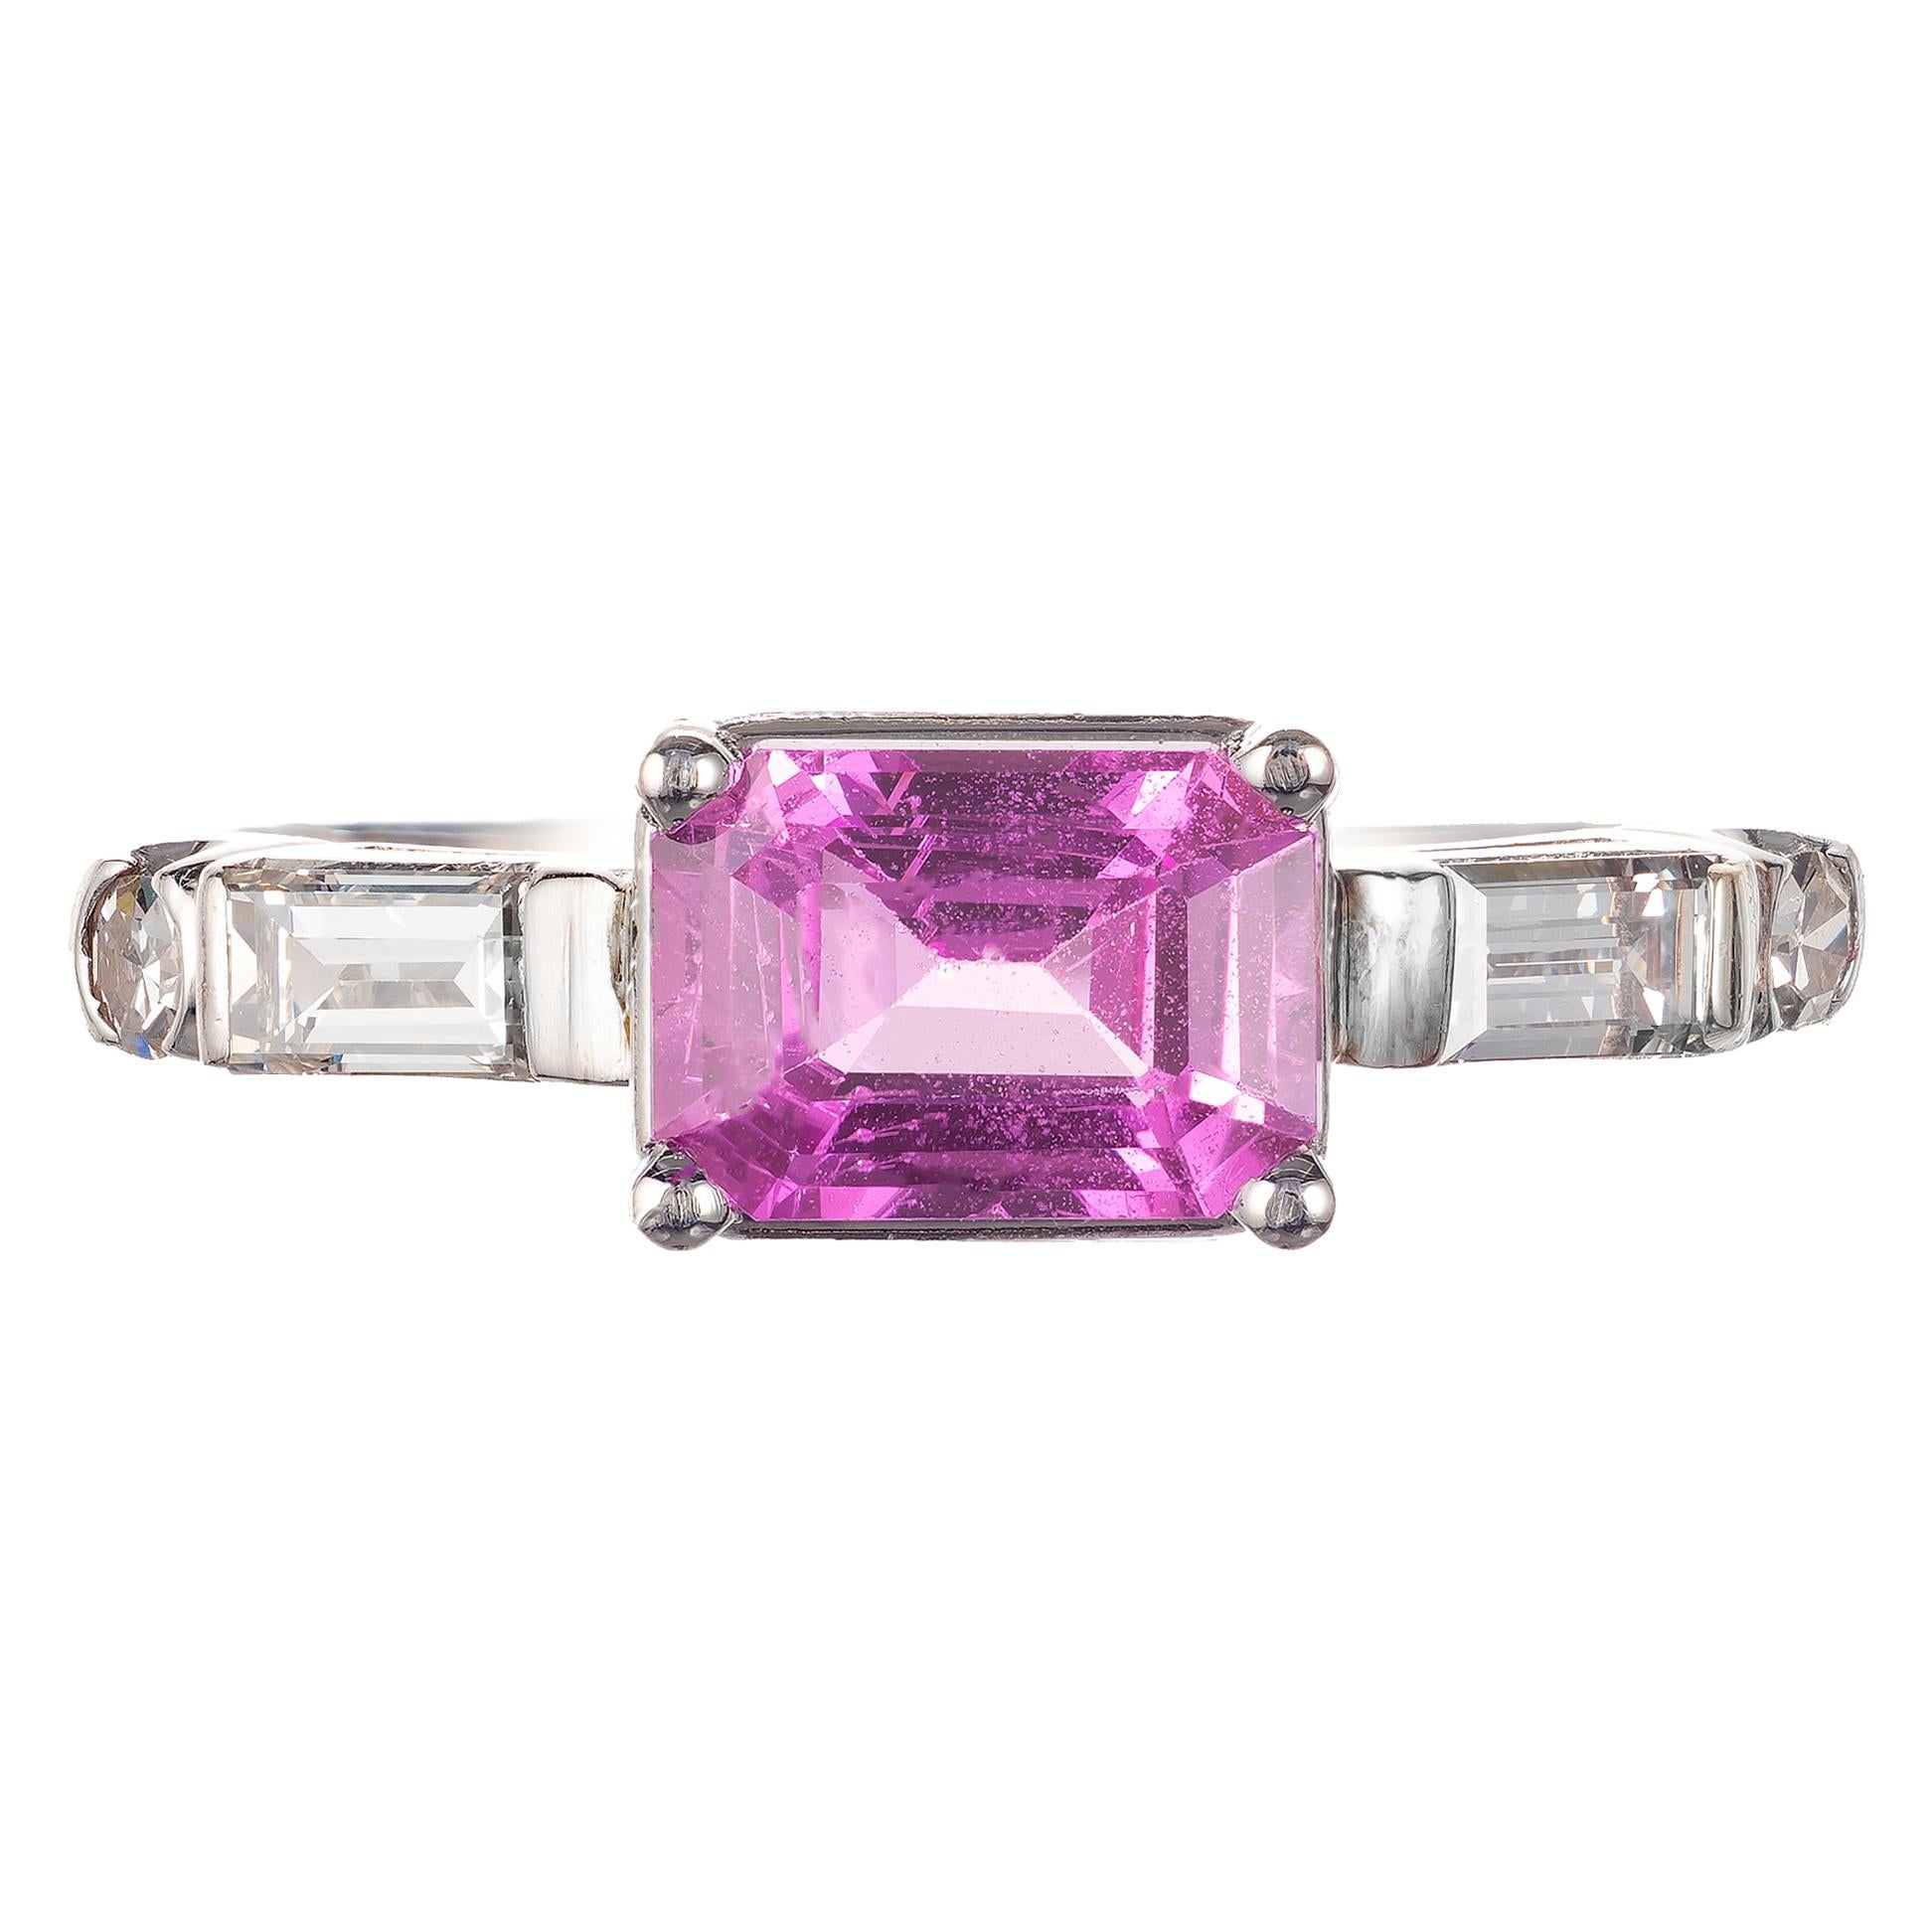 Mid-century 1940-1950 sapphire and diamond engagement ring. GIA certified natural no heat no enhancement purple pink Sapphire center stone in a platinum setting with two baguette and round accident diamonds. 

1 purplish pink octagonal Emerald cut